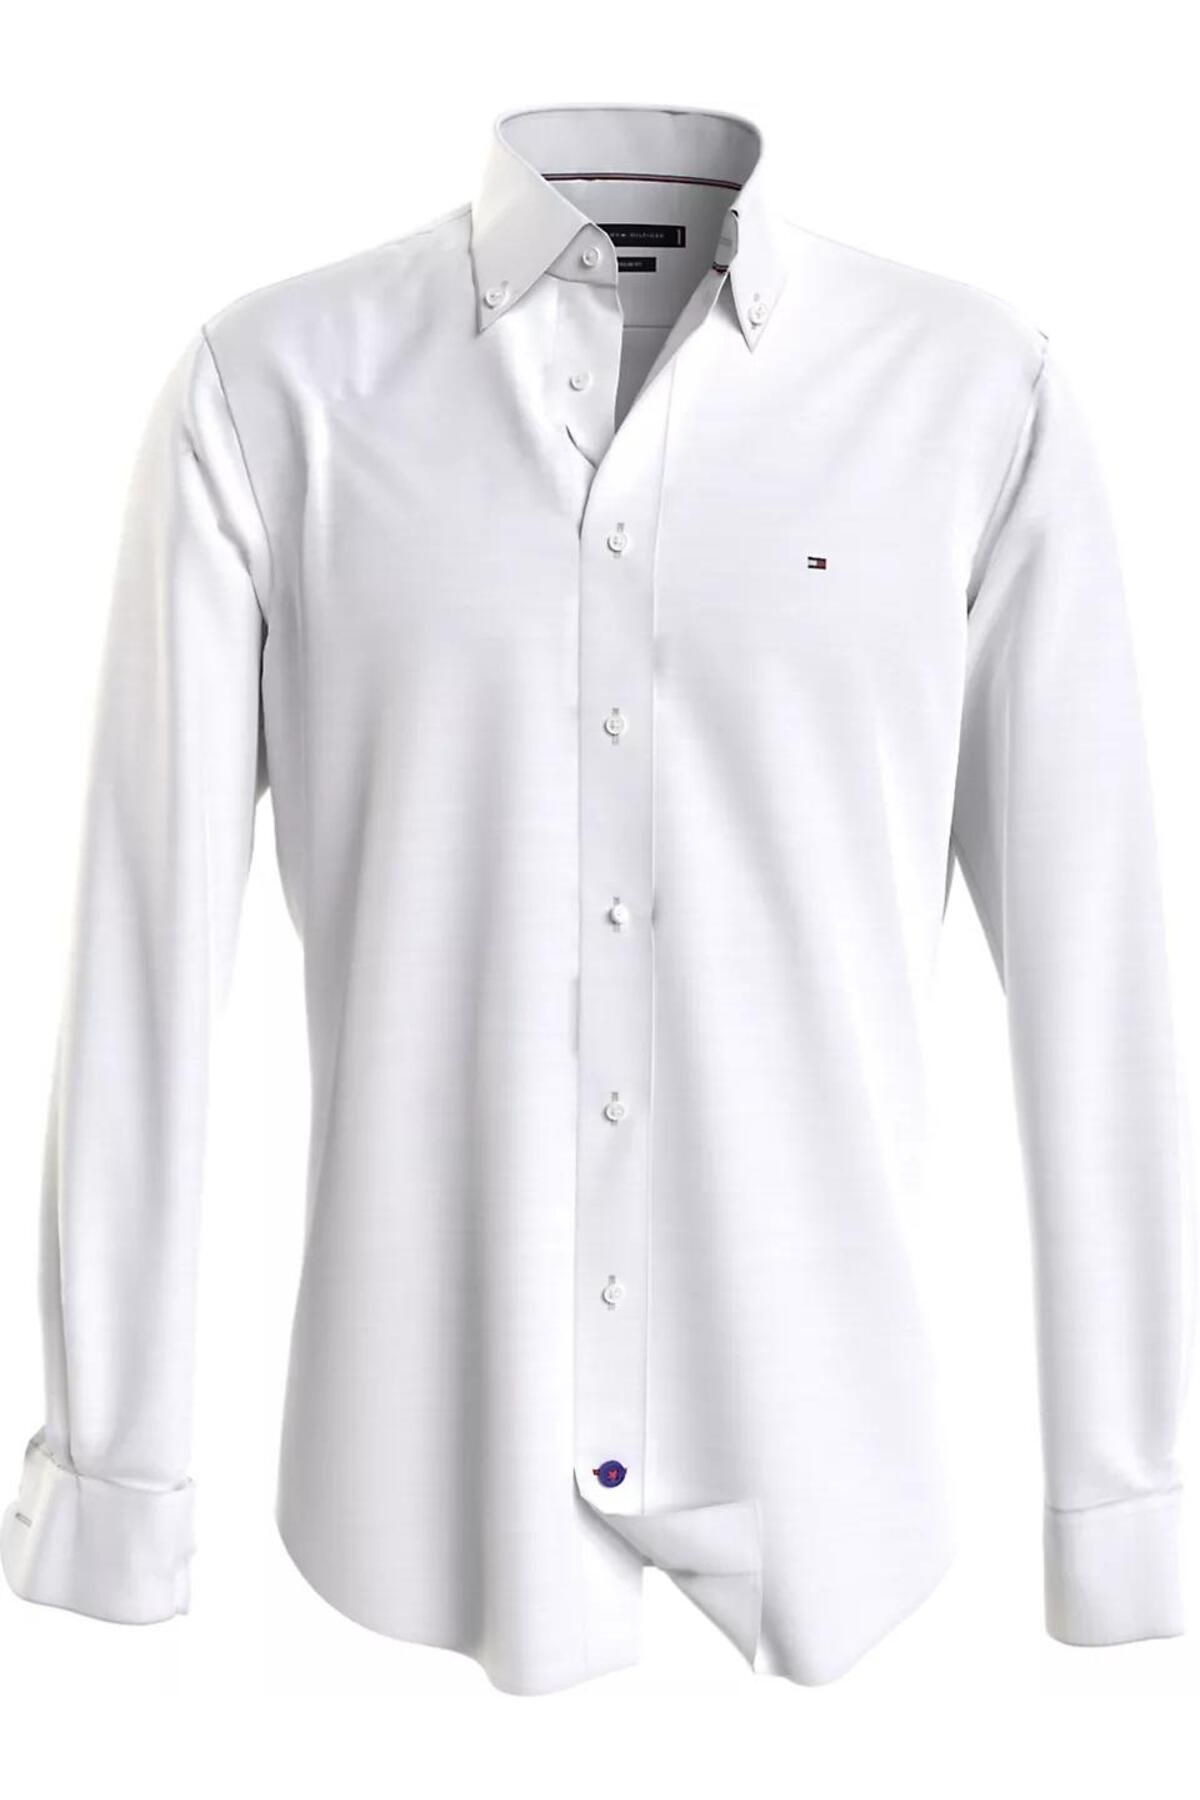 Tommy Hilfiger CL-W OXFORD SOLID SHIRT